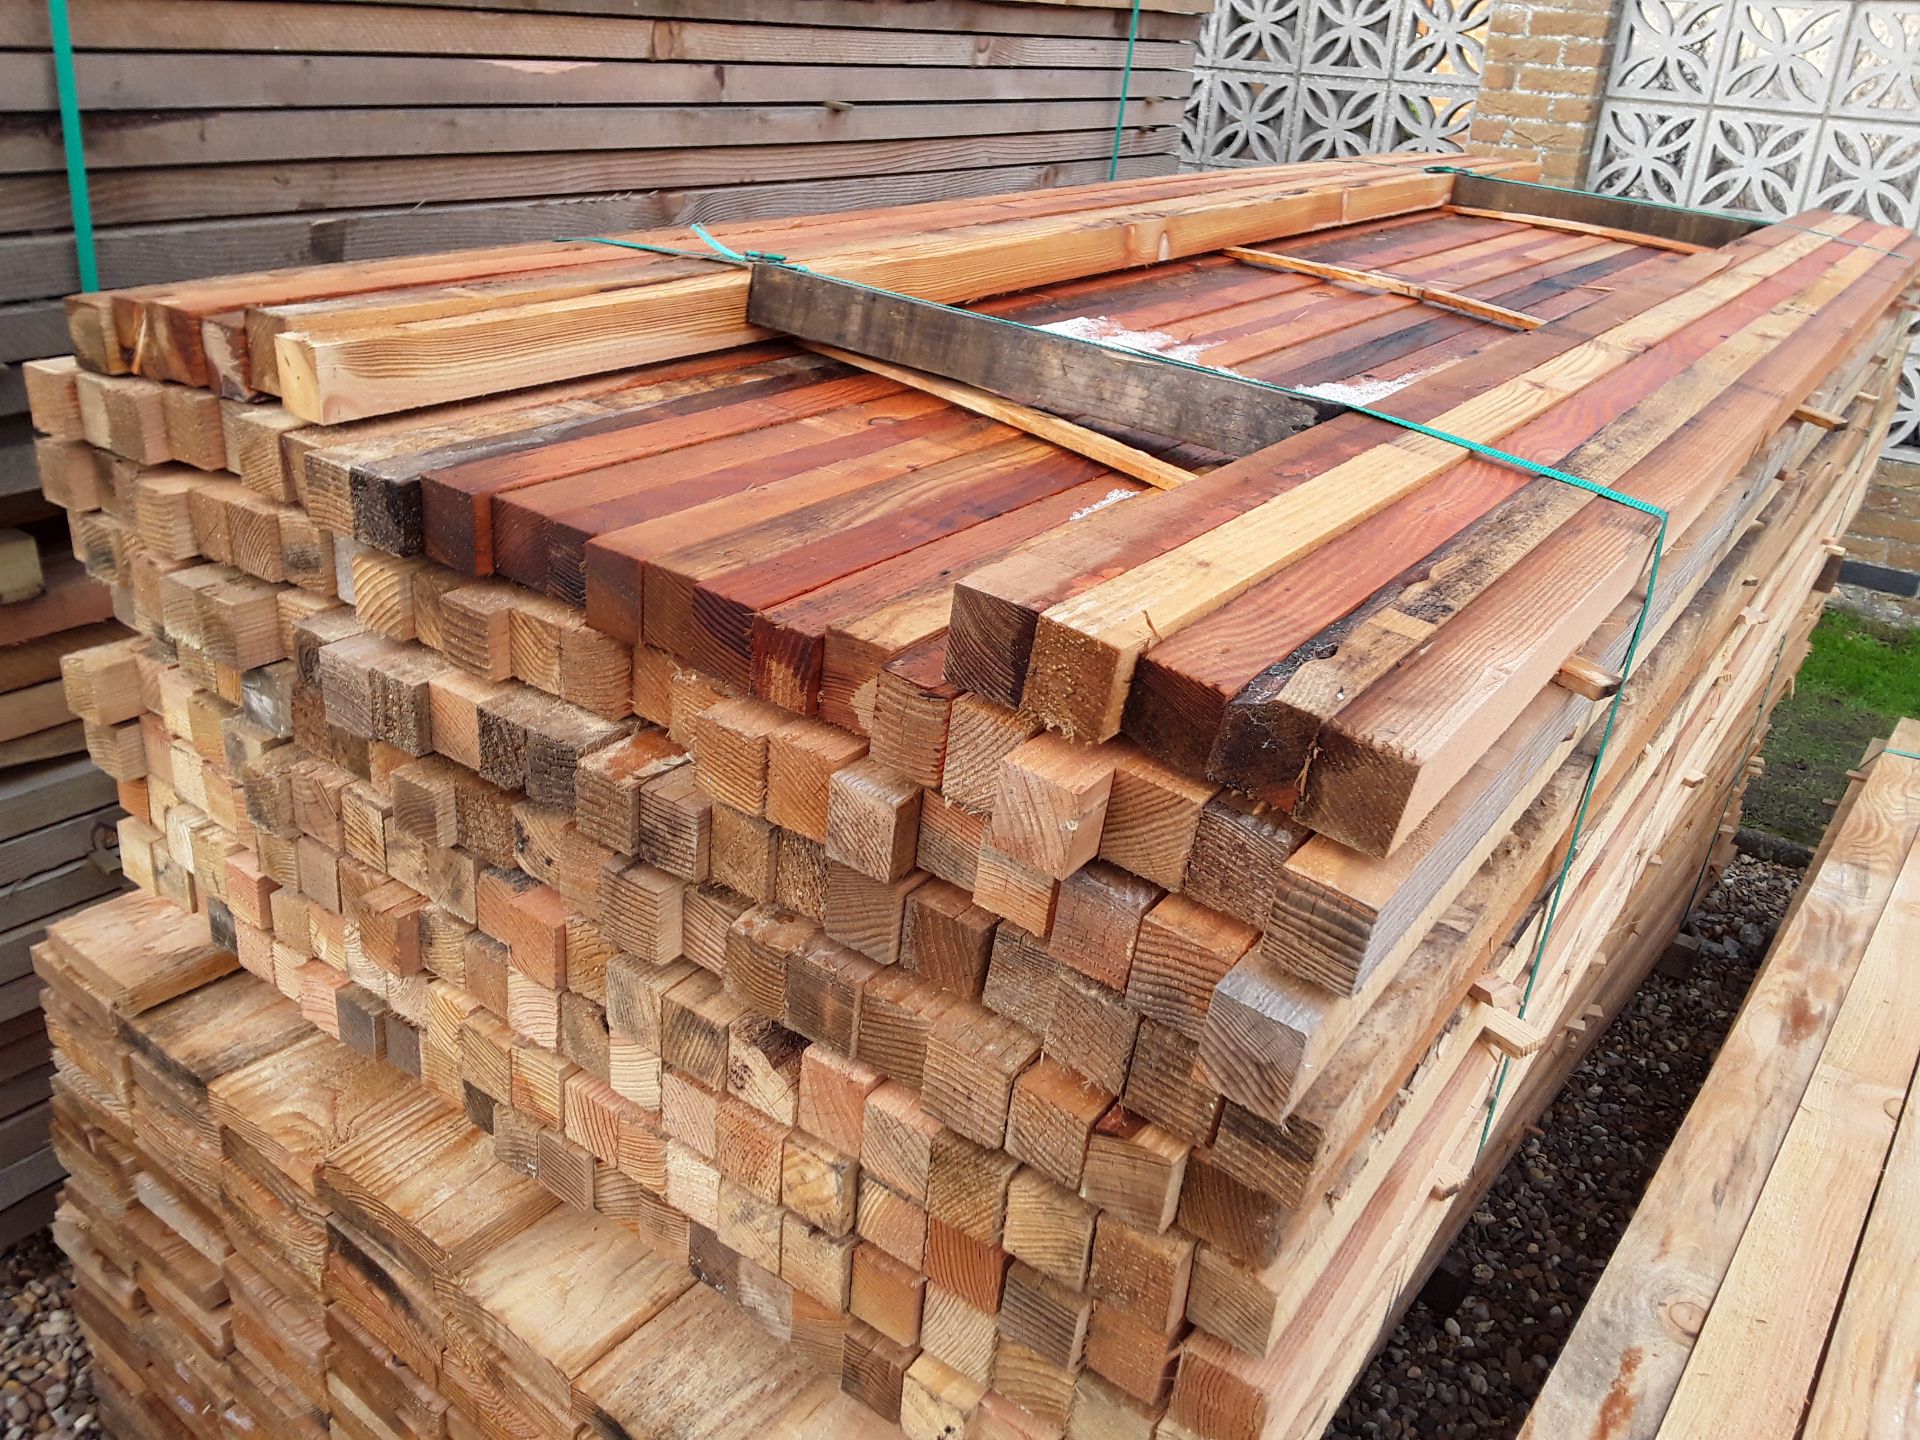 75x Softwood Timber Sawn Larch/ Douglas Fir Offcuts - Image 3 of 4